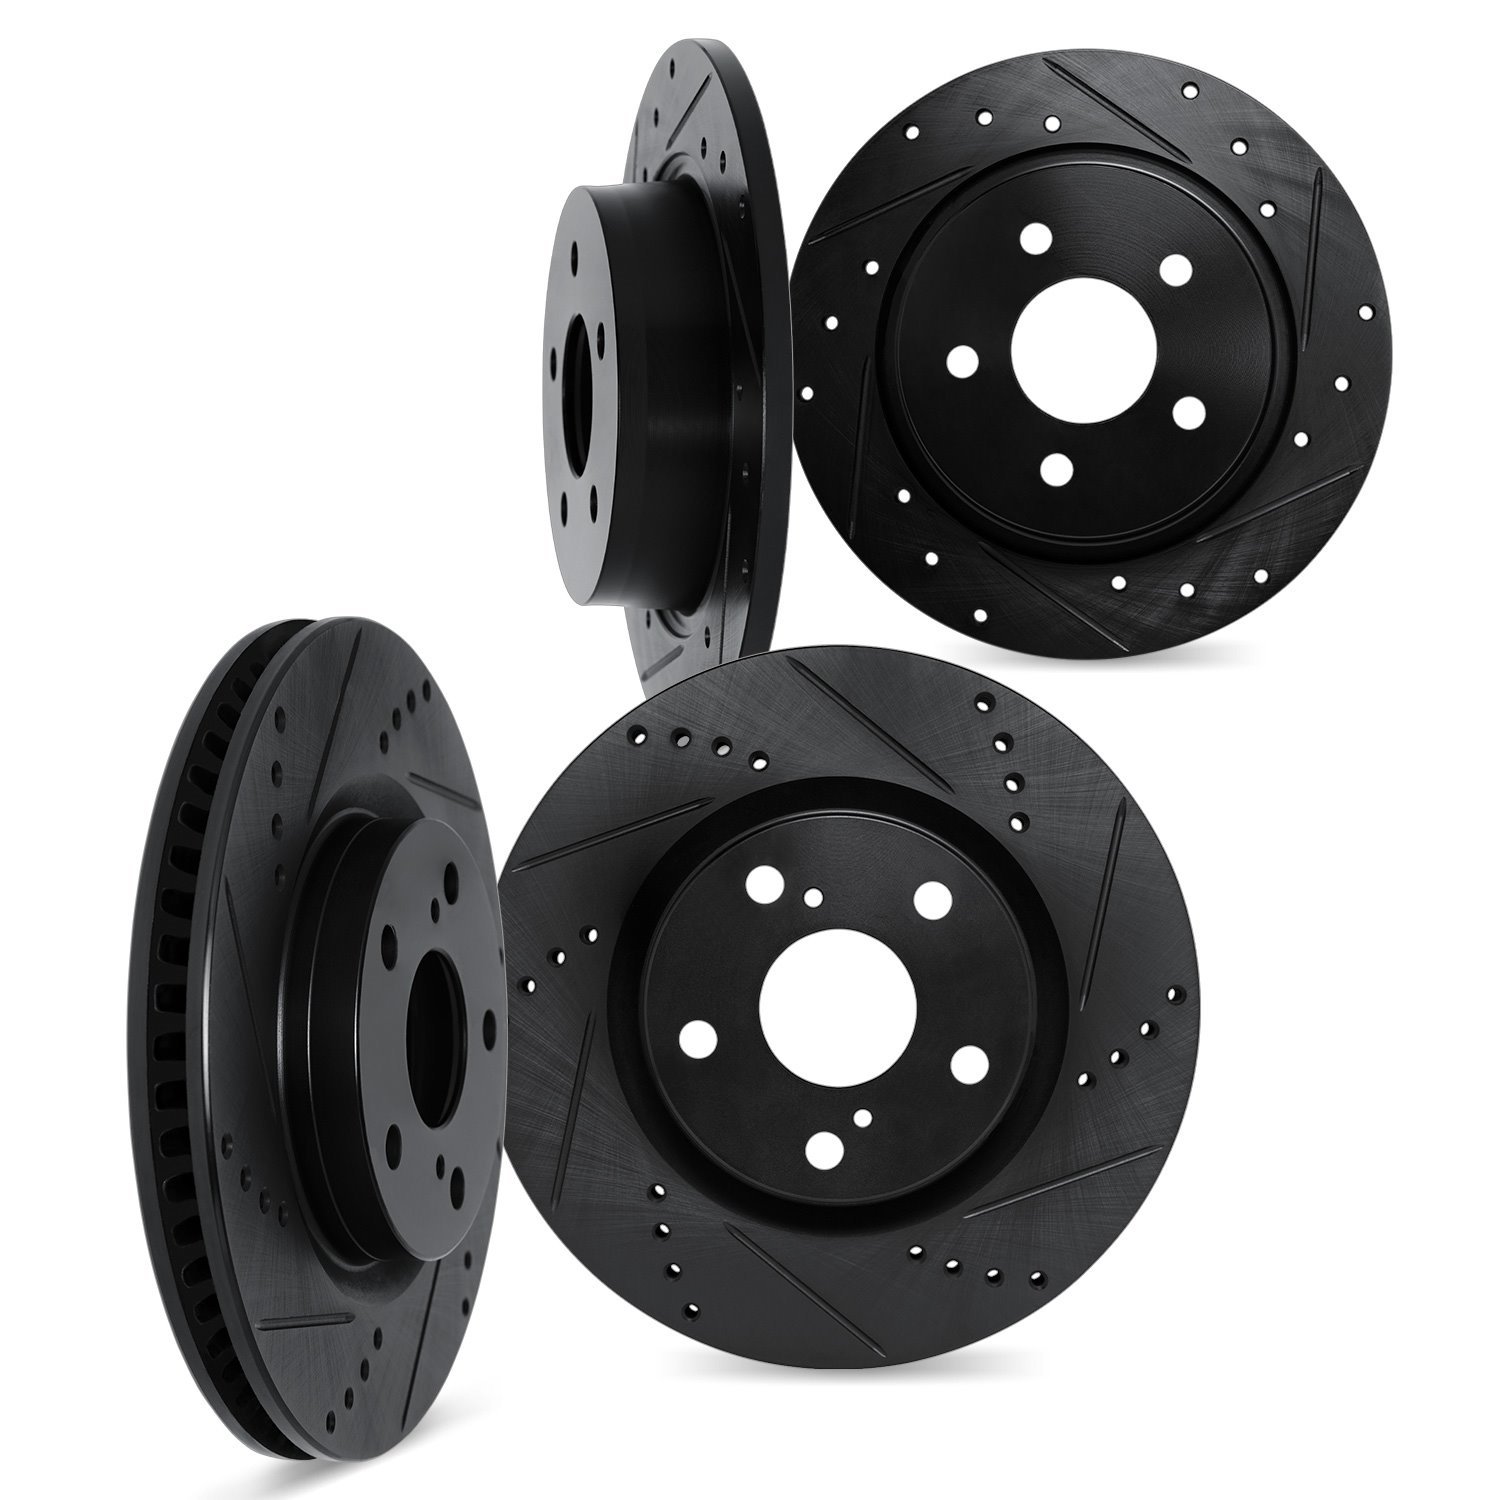 8004-76021 Drilled/Slotted Brake Rotors [Black], 1999-2003 Lexus/Toyota/Scion, Position: Front and Rear